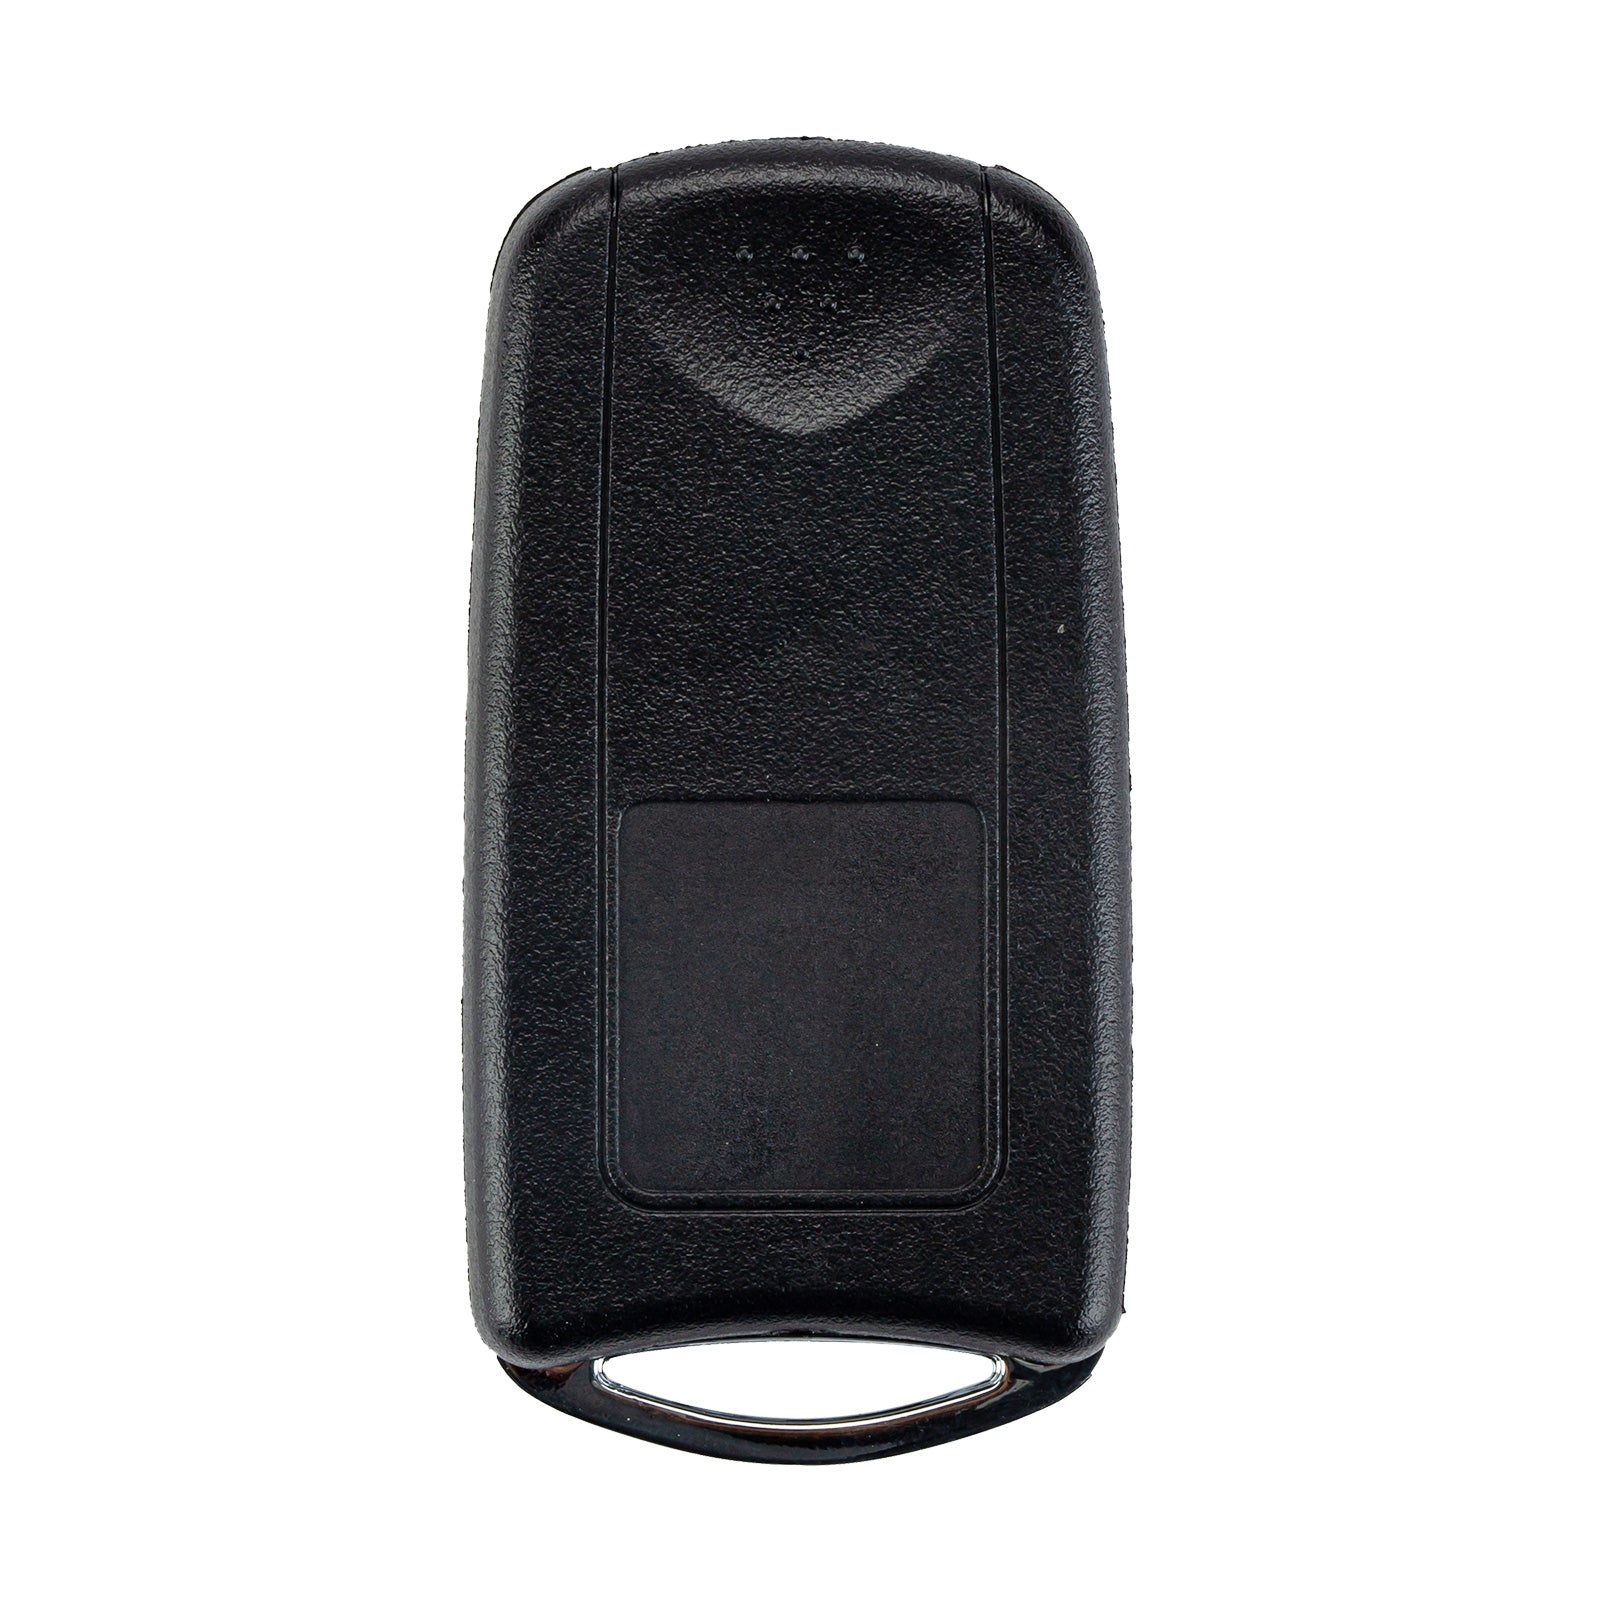 Keyless Entry Remote Flip Key Fob Replacement for Acura 2007-2013 RDX MDX 3BTN N5F0602A1A